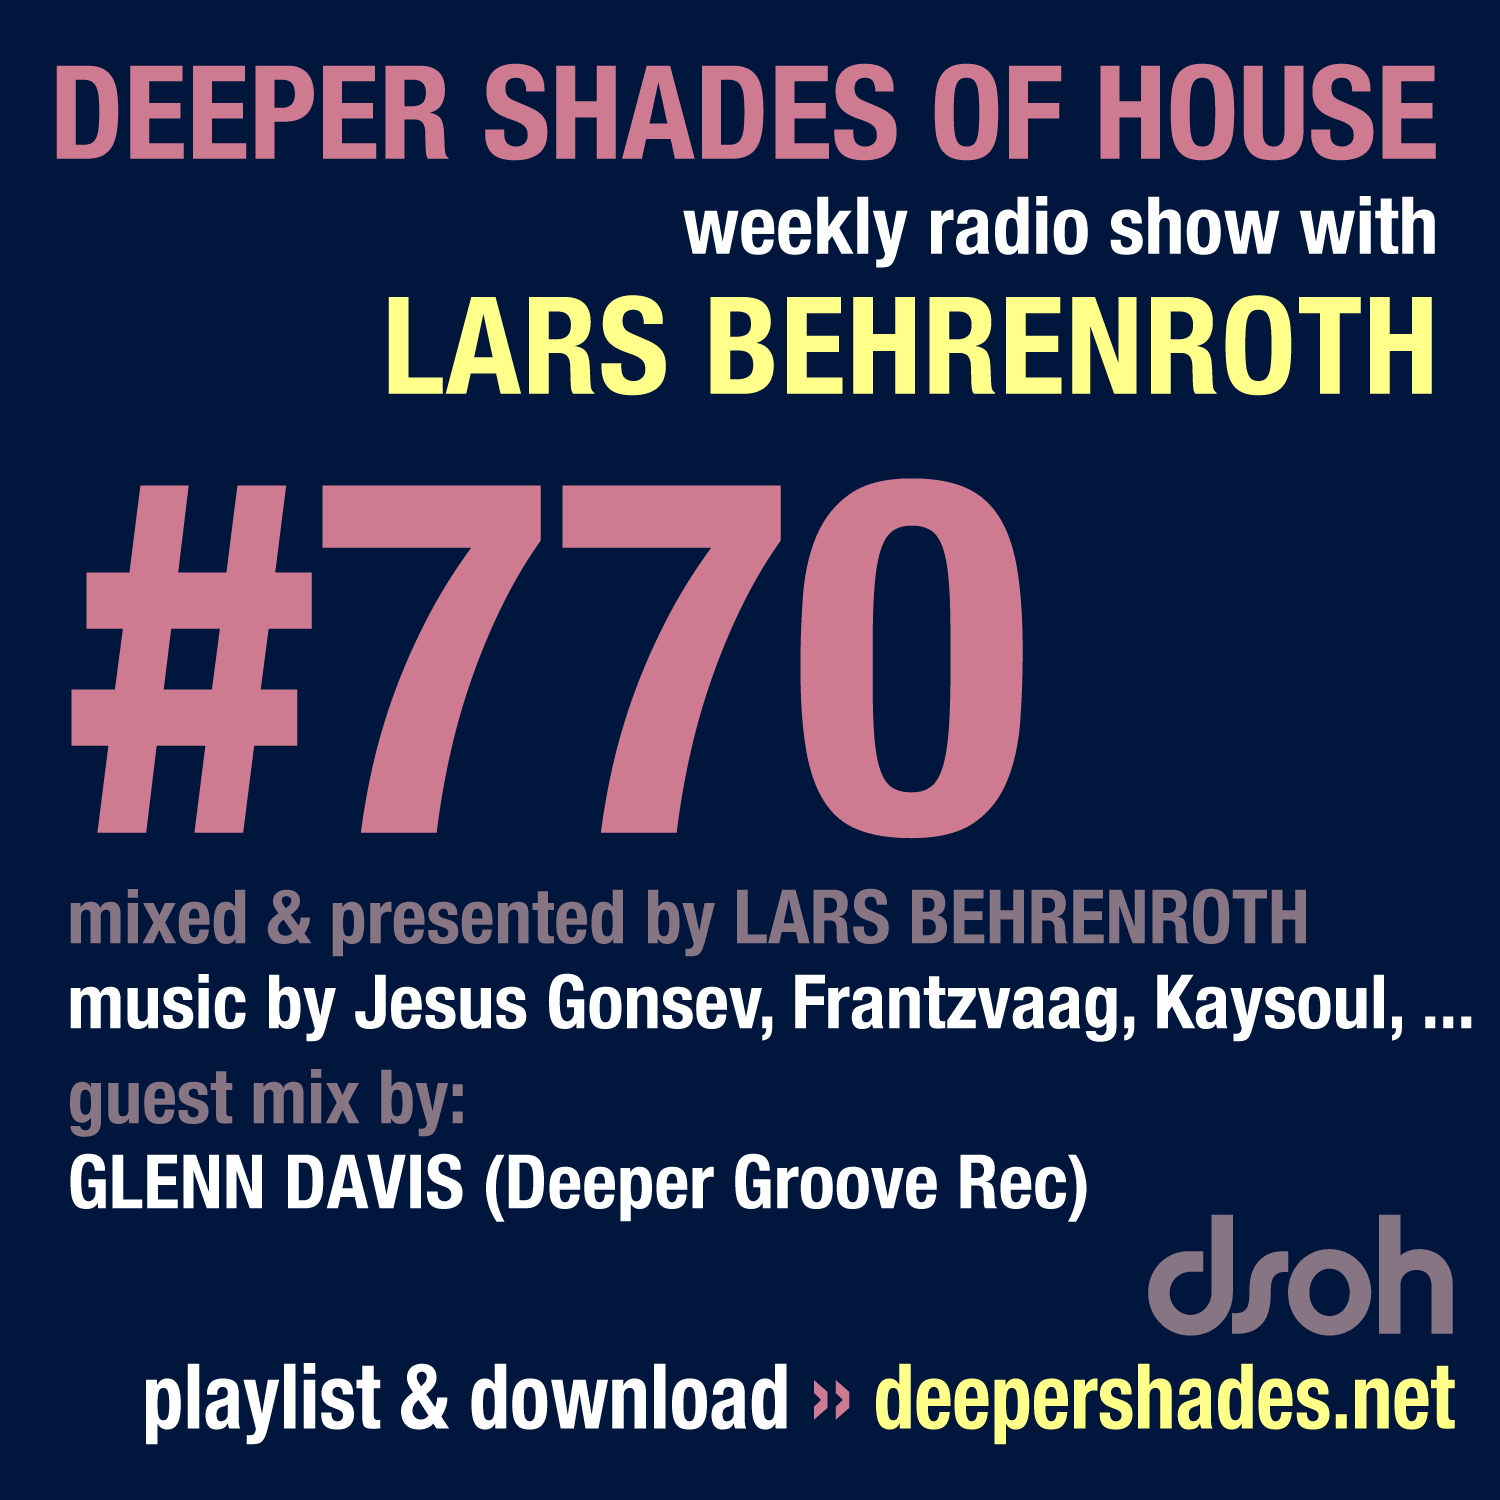 Deeper Shades Of House 770